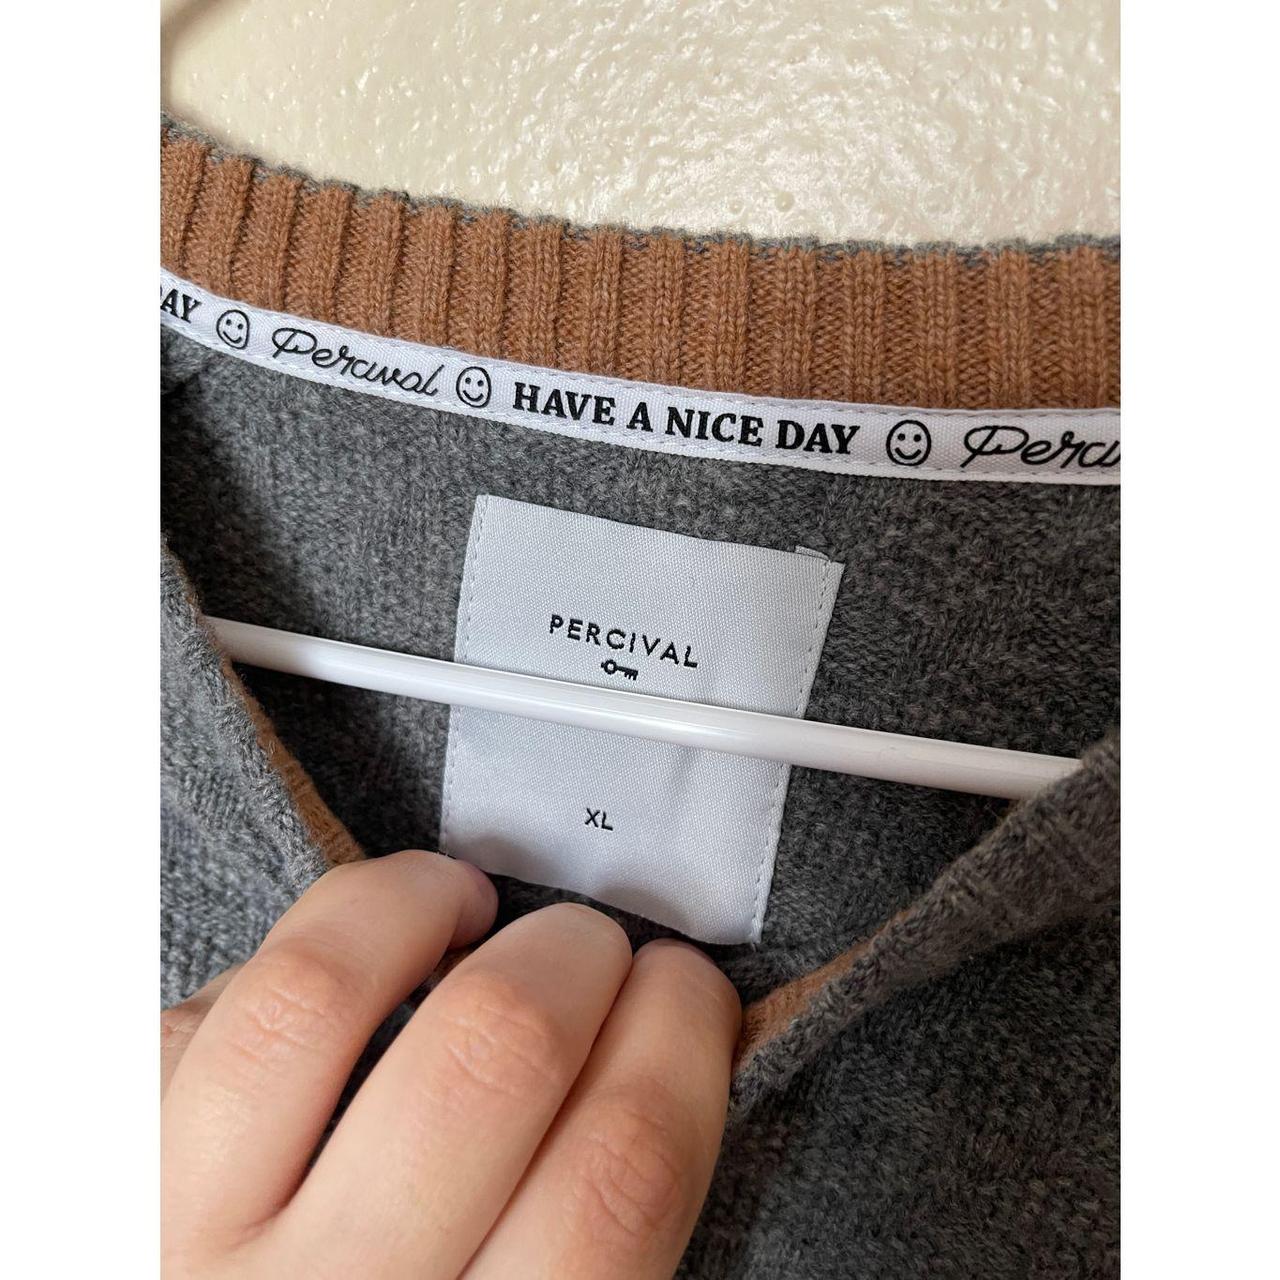 Product Image 4 - 100% Merino wool. Oh you'd